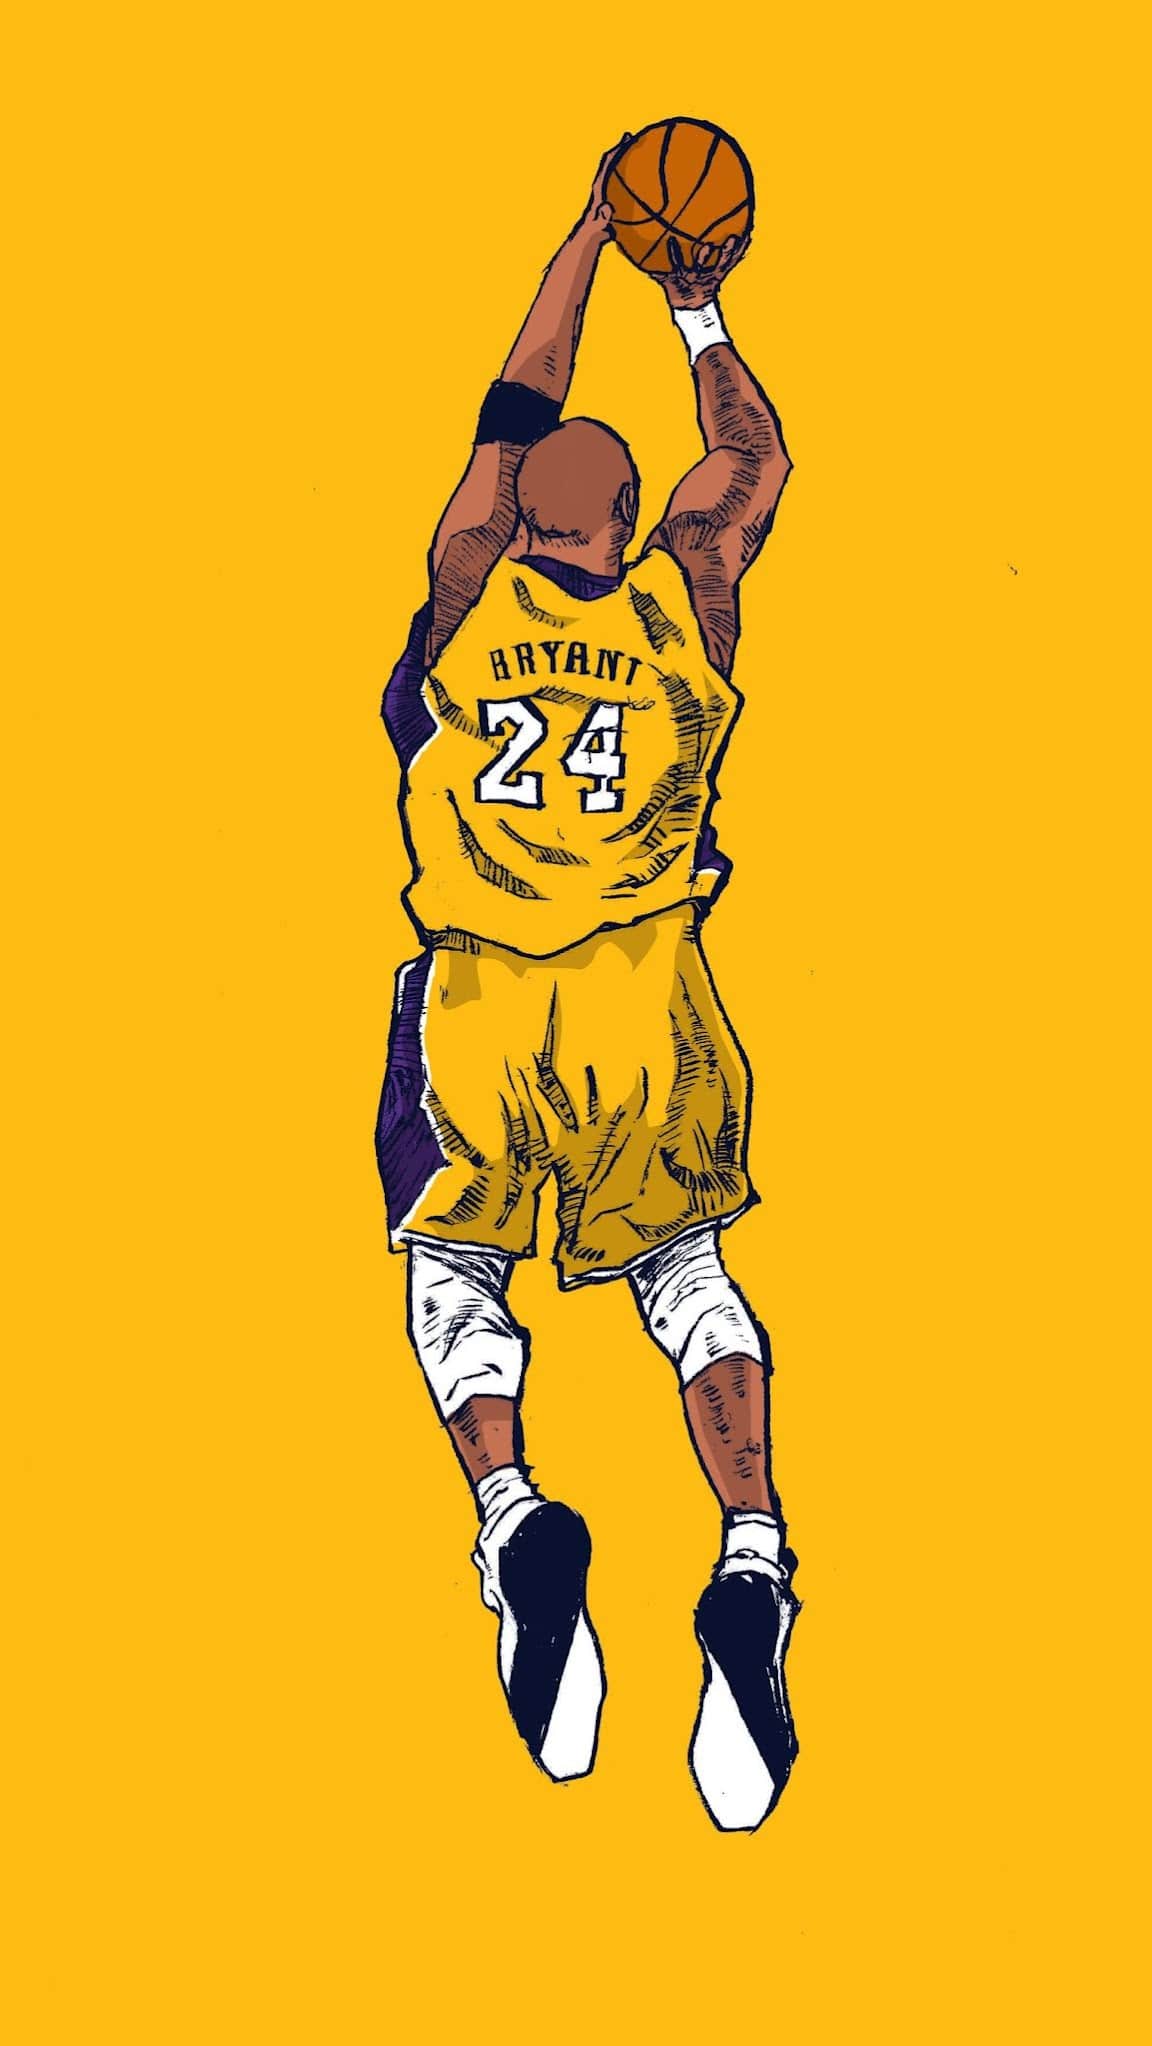 A drawing of kobe bryant jumping for the ball - Basketball